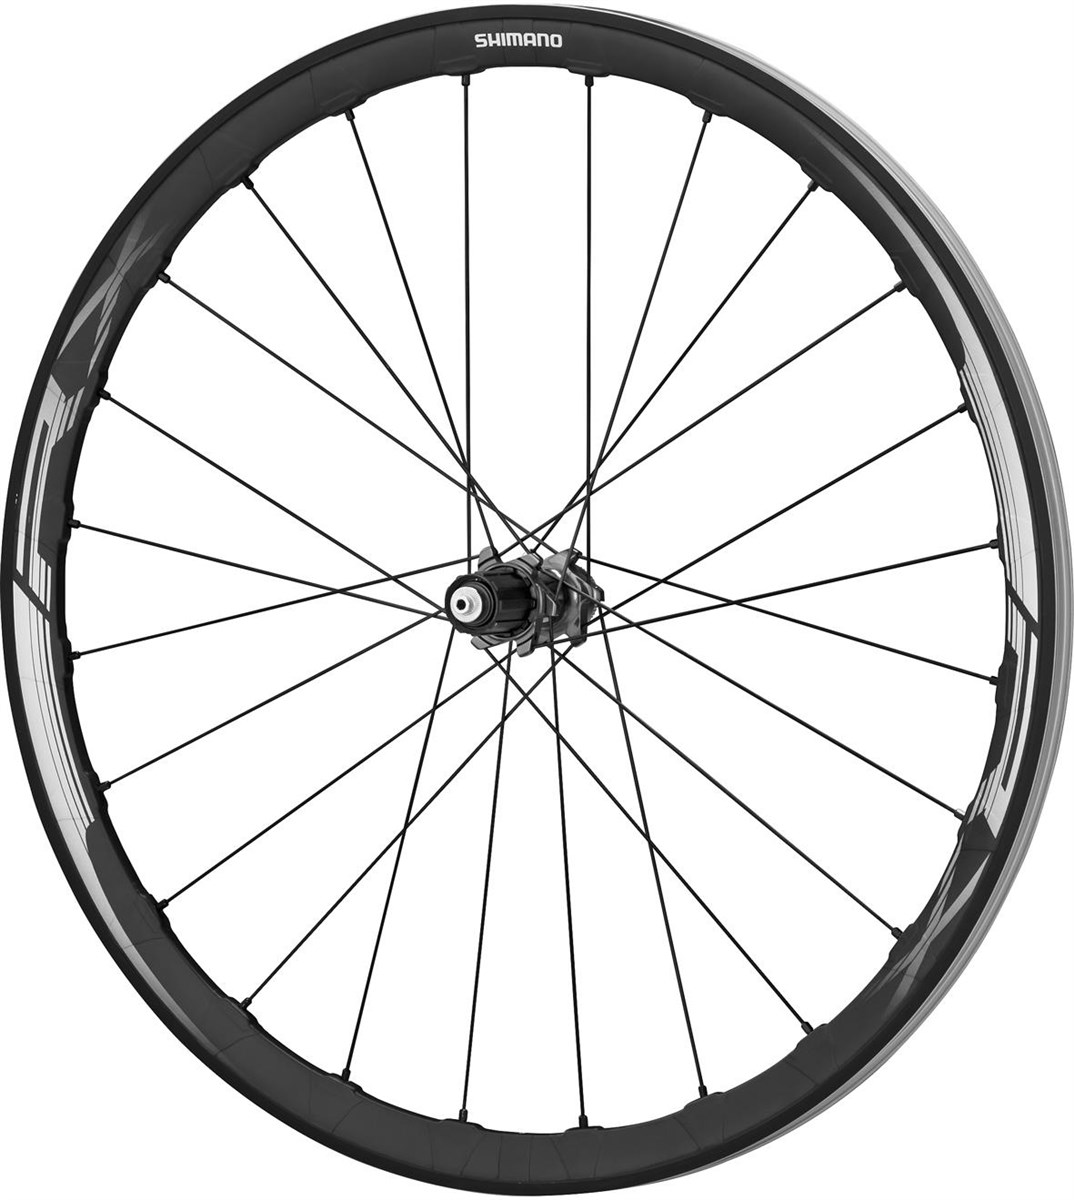 Shimano WH-RX830 Disc Road Wheel - Tubeless Ready Clincher 35 mm - 11-Speed - Rear product image